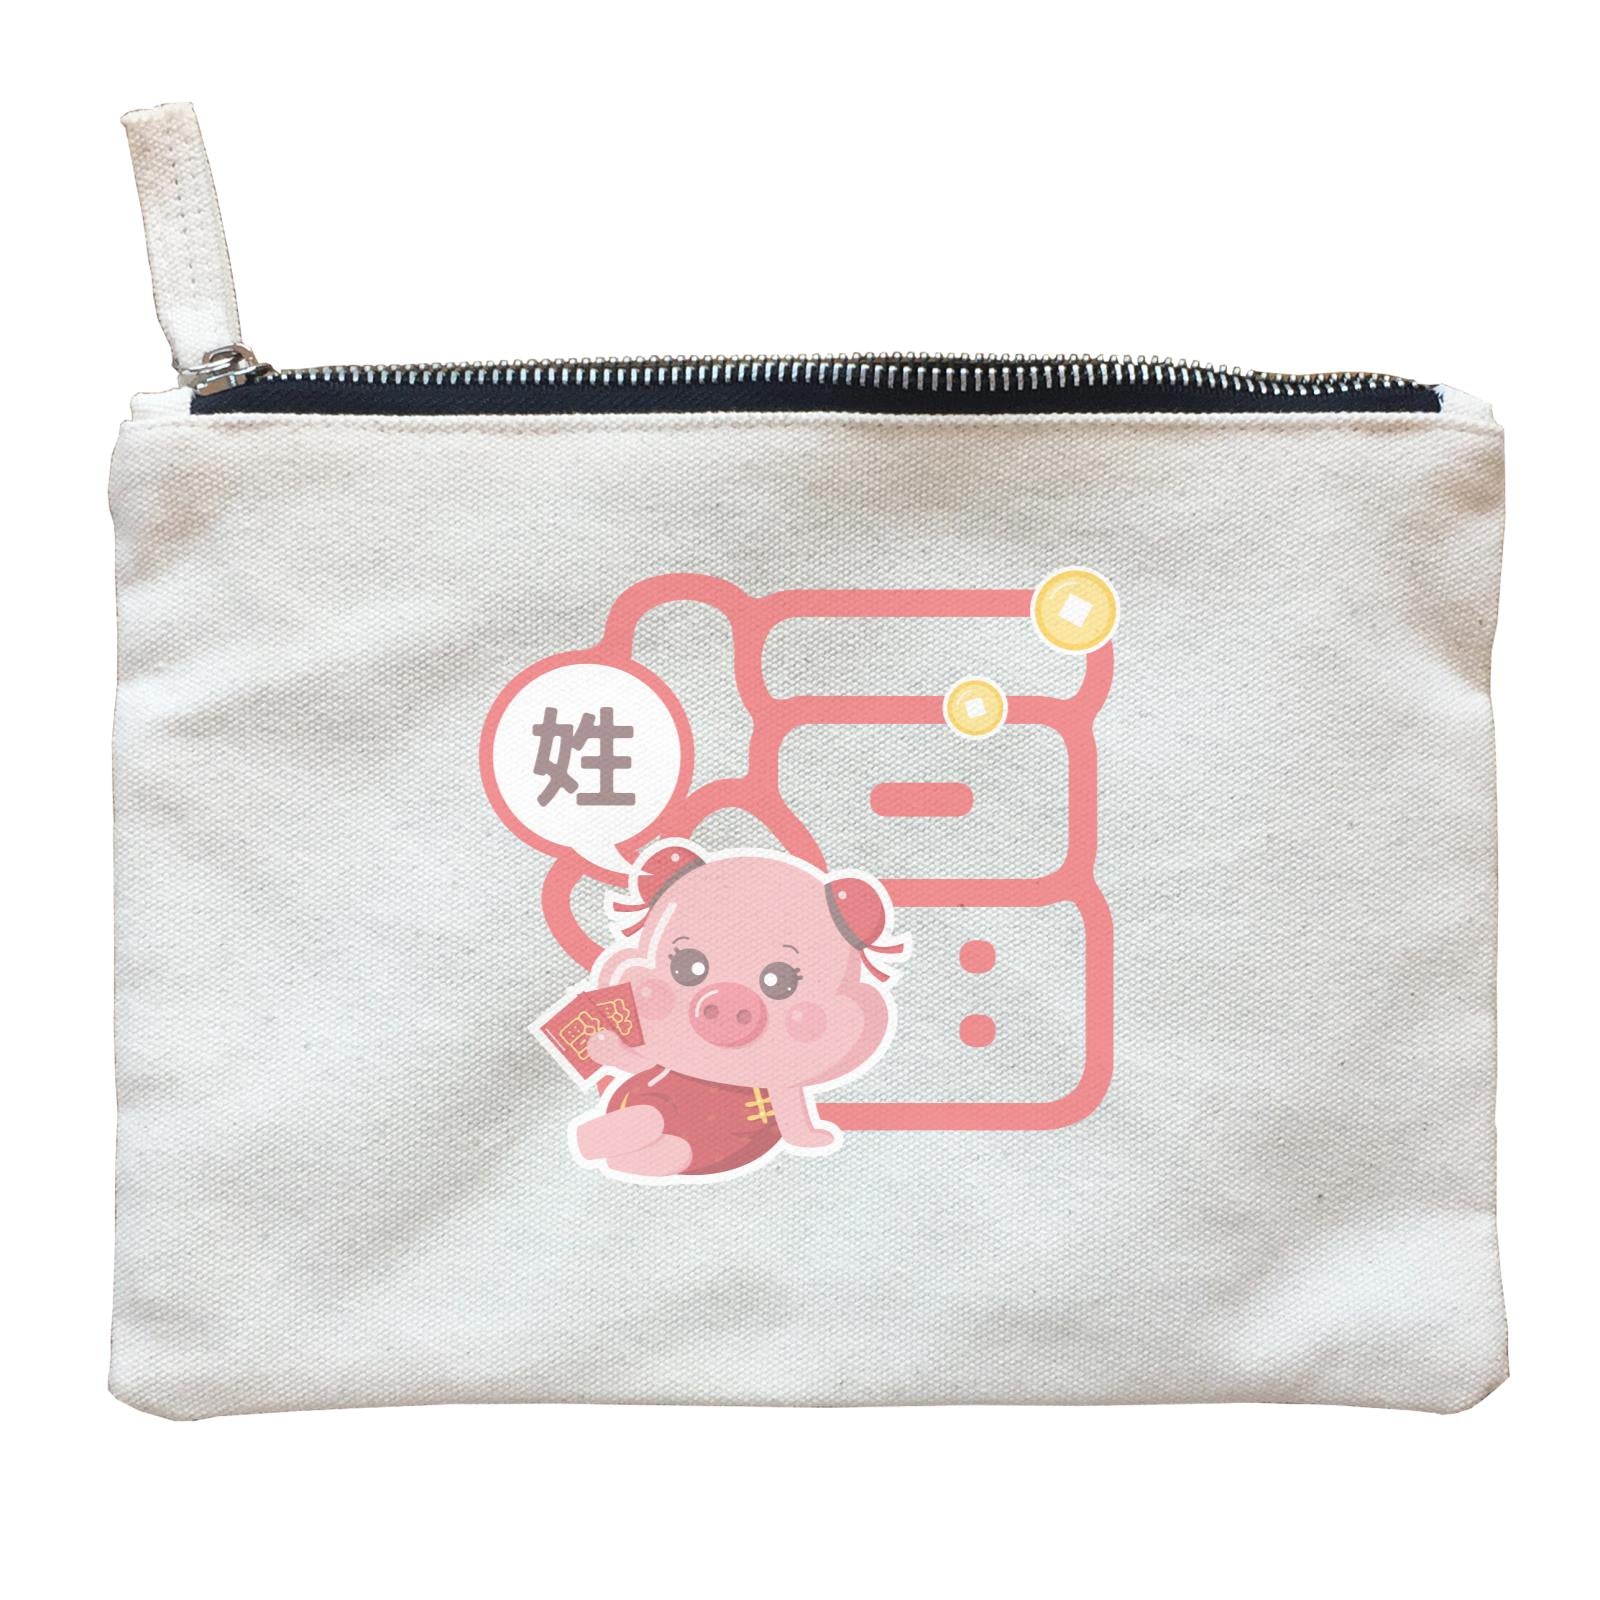 Chinese New Year Cute Pig Good Fortune Mom Accessories With Addname Zipper Pouch